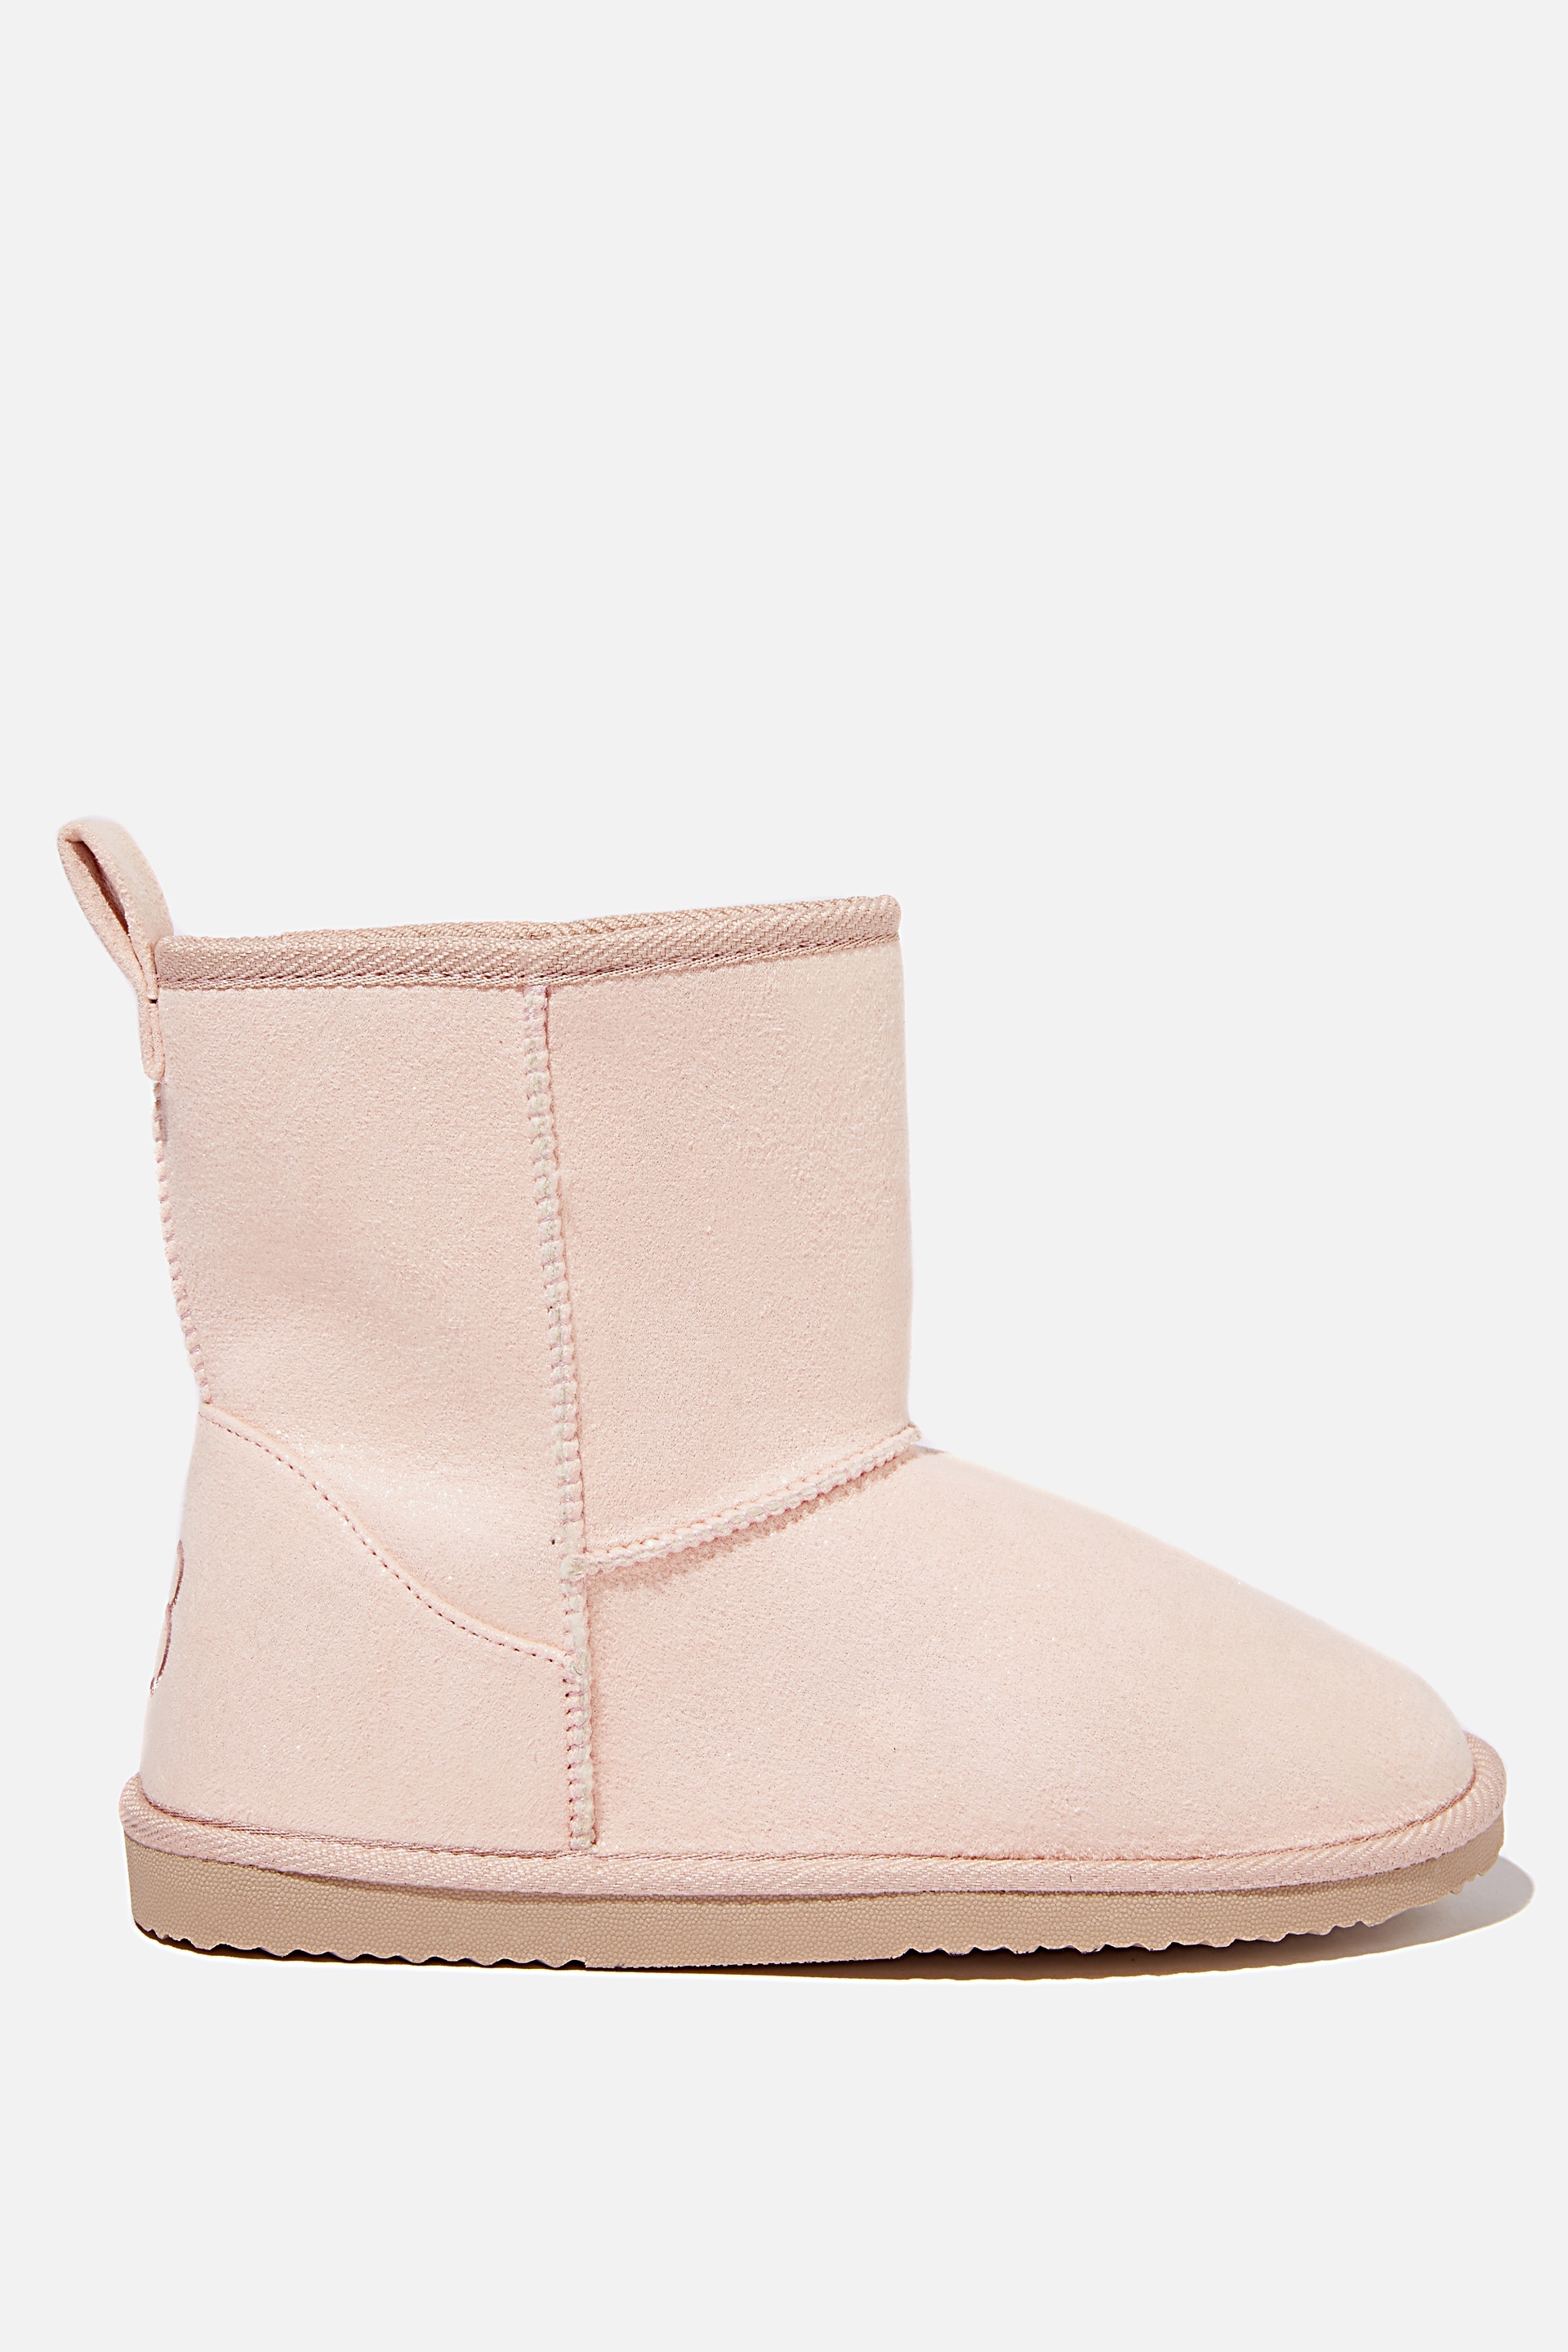 cotton on body ugg boots